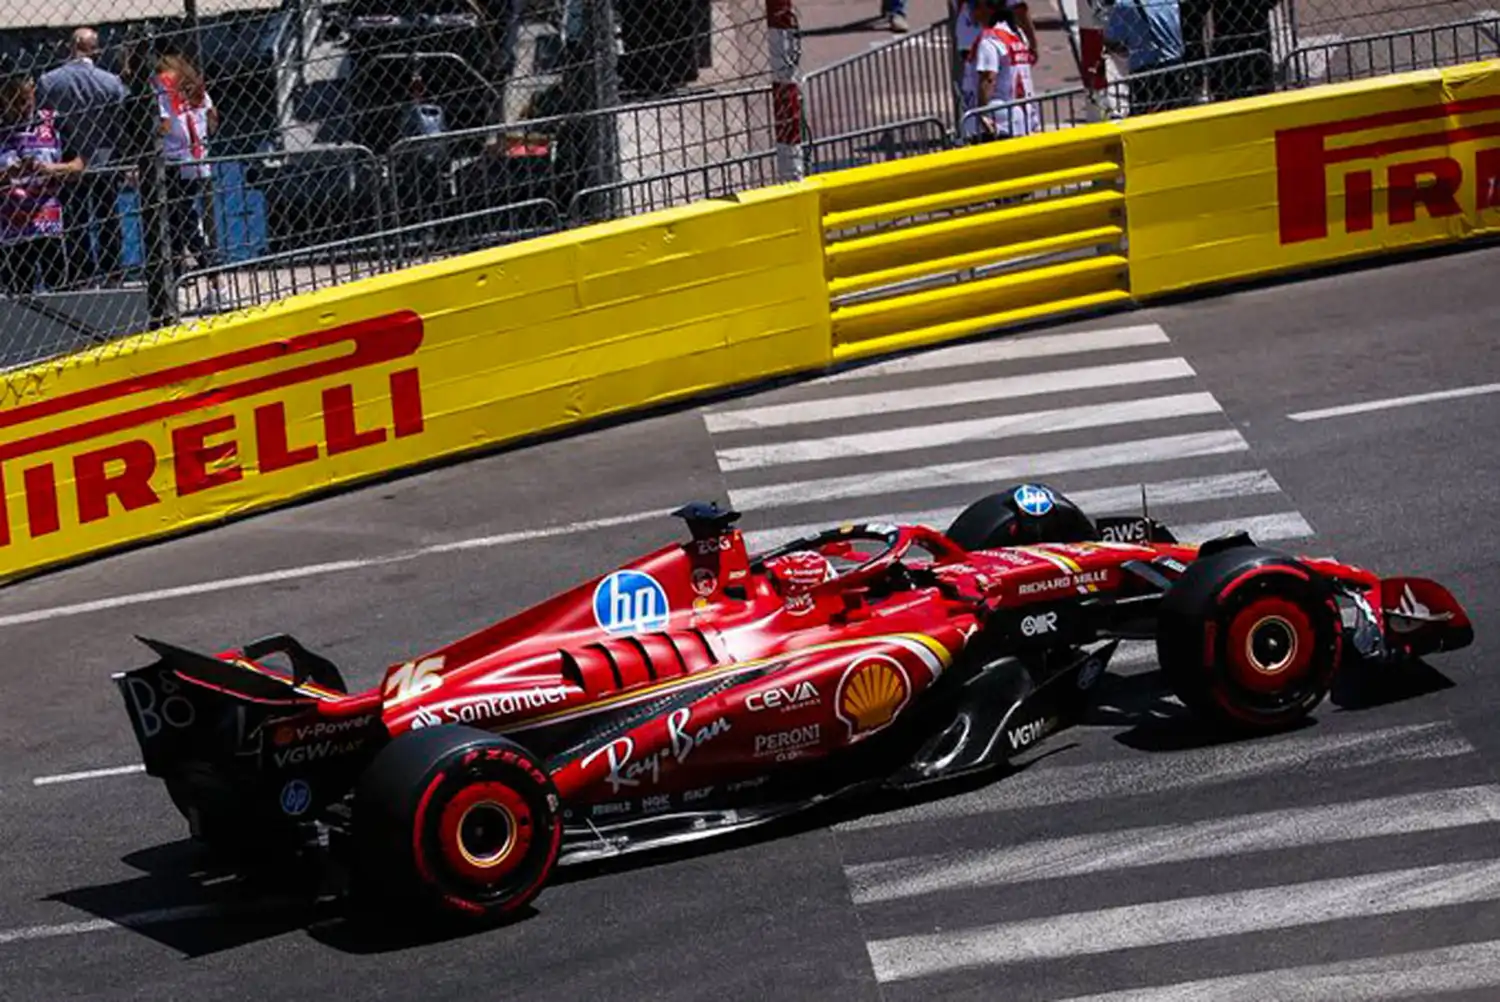 F1 – Leclerc Takes Emotional Home Win In Monaco Ahead Of Piastri And Sainz